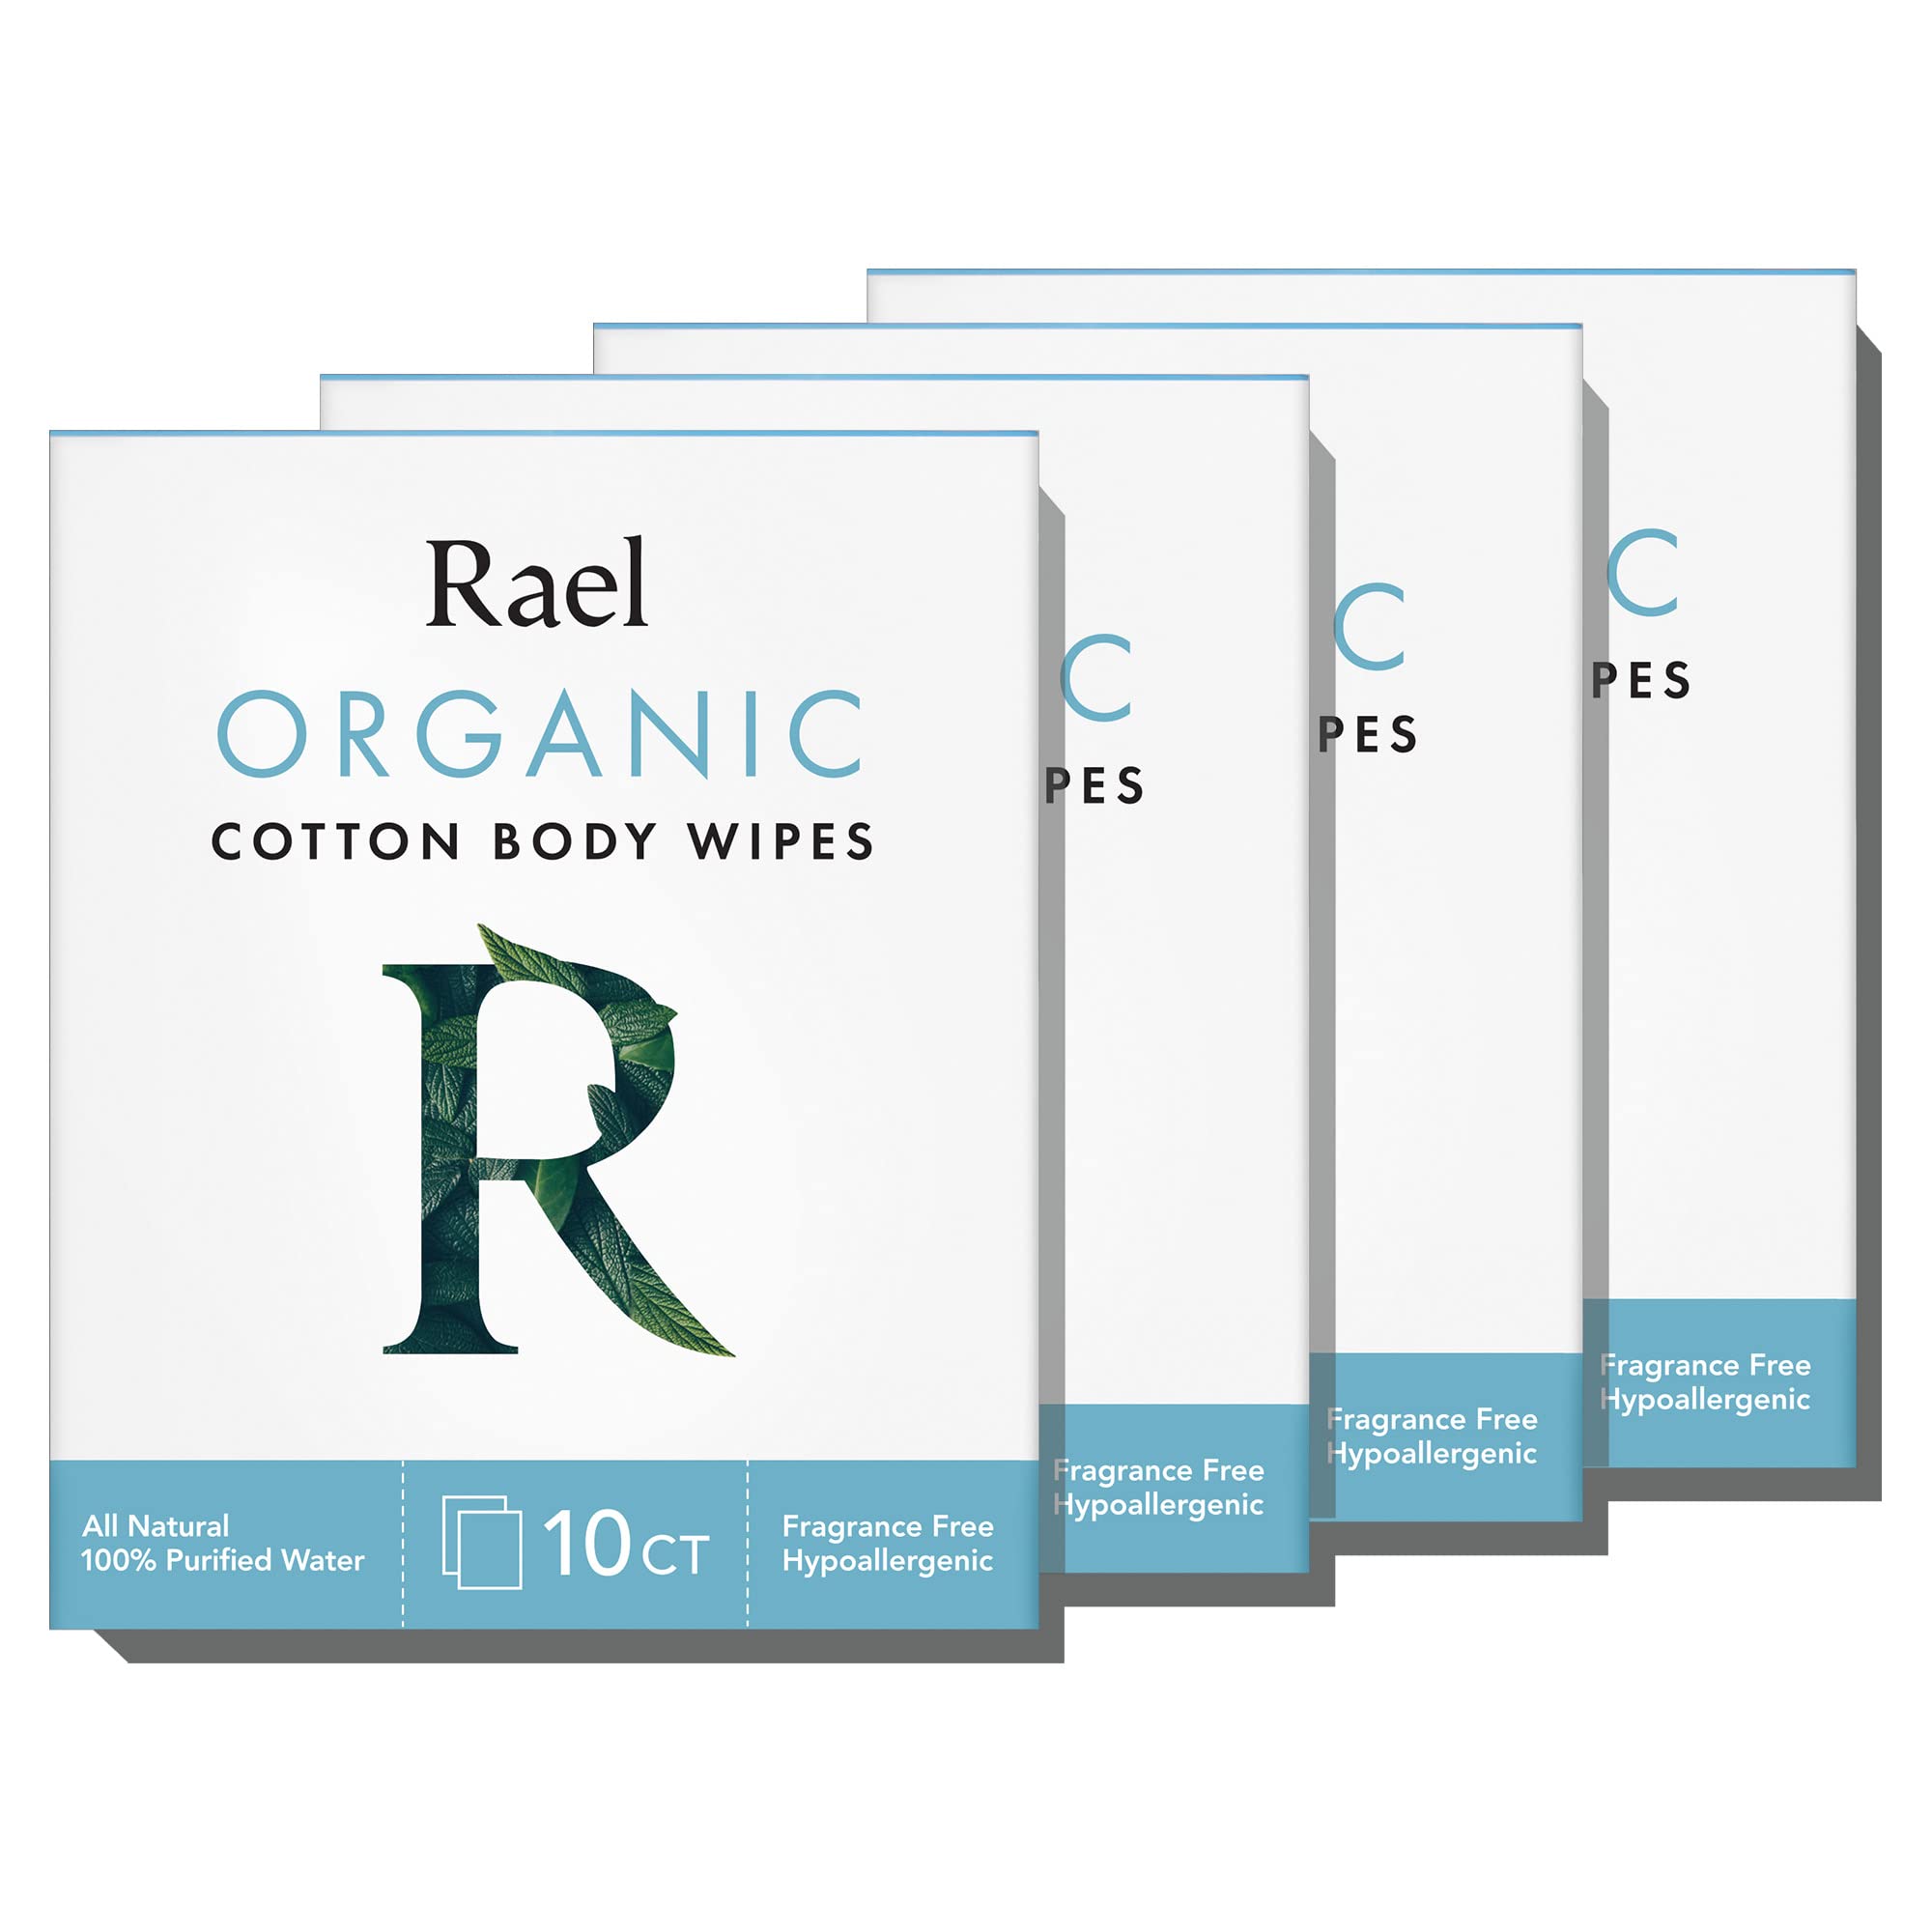 Rael Organic Cotton Cover Menstrual Overnight Pads - Unscented